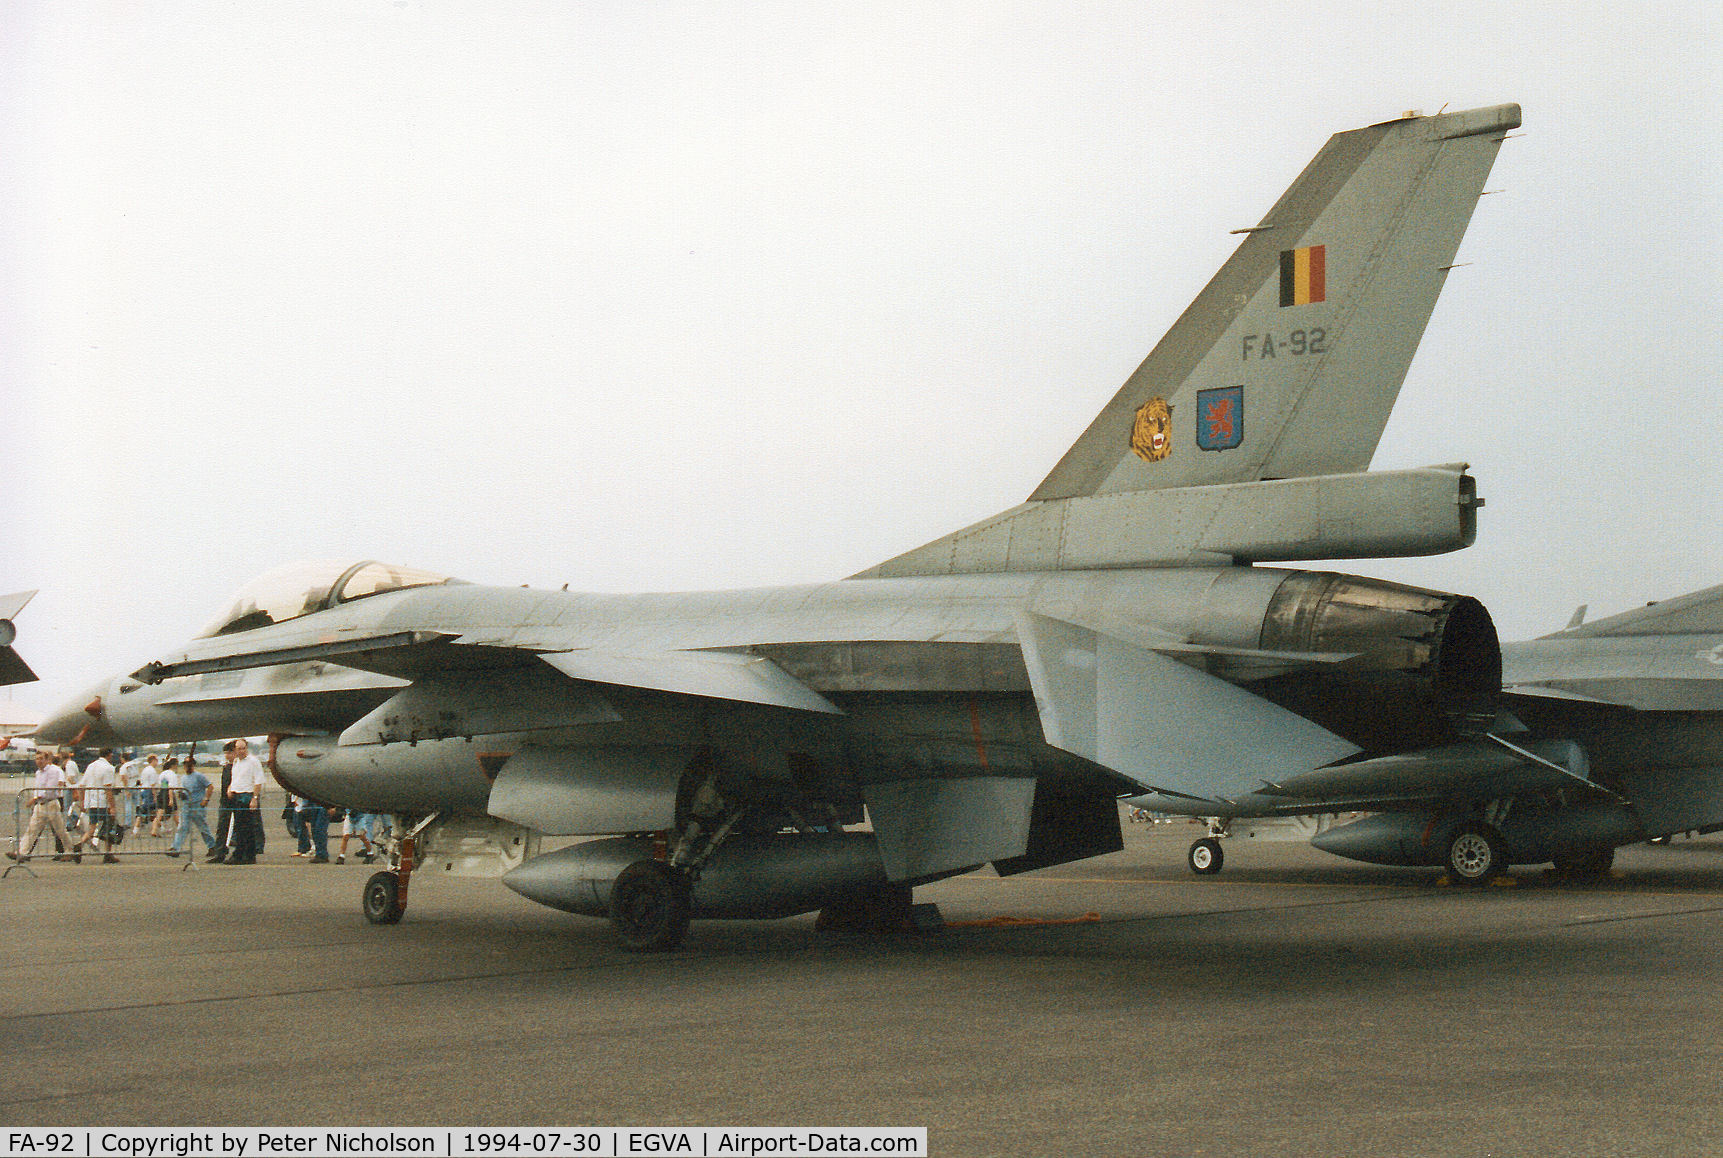 FA-92, 1980 SABCA F-16AM Fighting Falcon C/N 6H-92, F-16A Falcon, callsign Belgian Air Force 431, of 31 Squadron on display at the 1994 Intnl Air Tattoo at RAF Fairford.